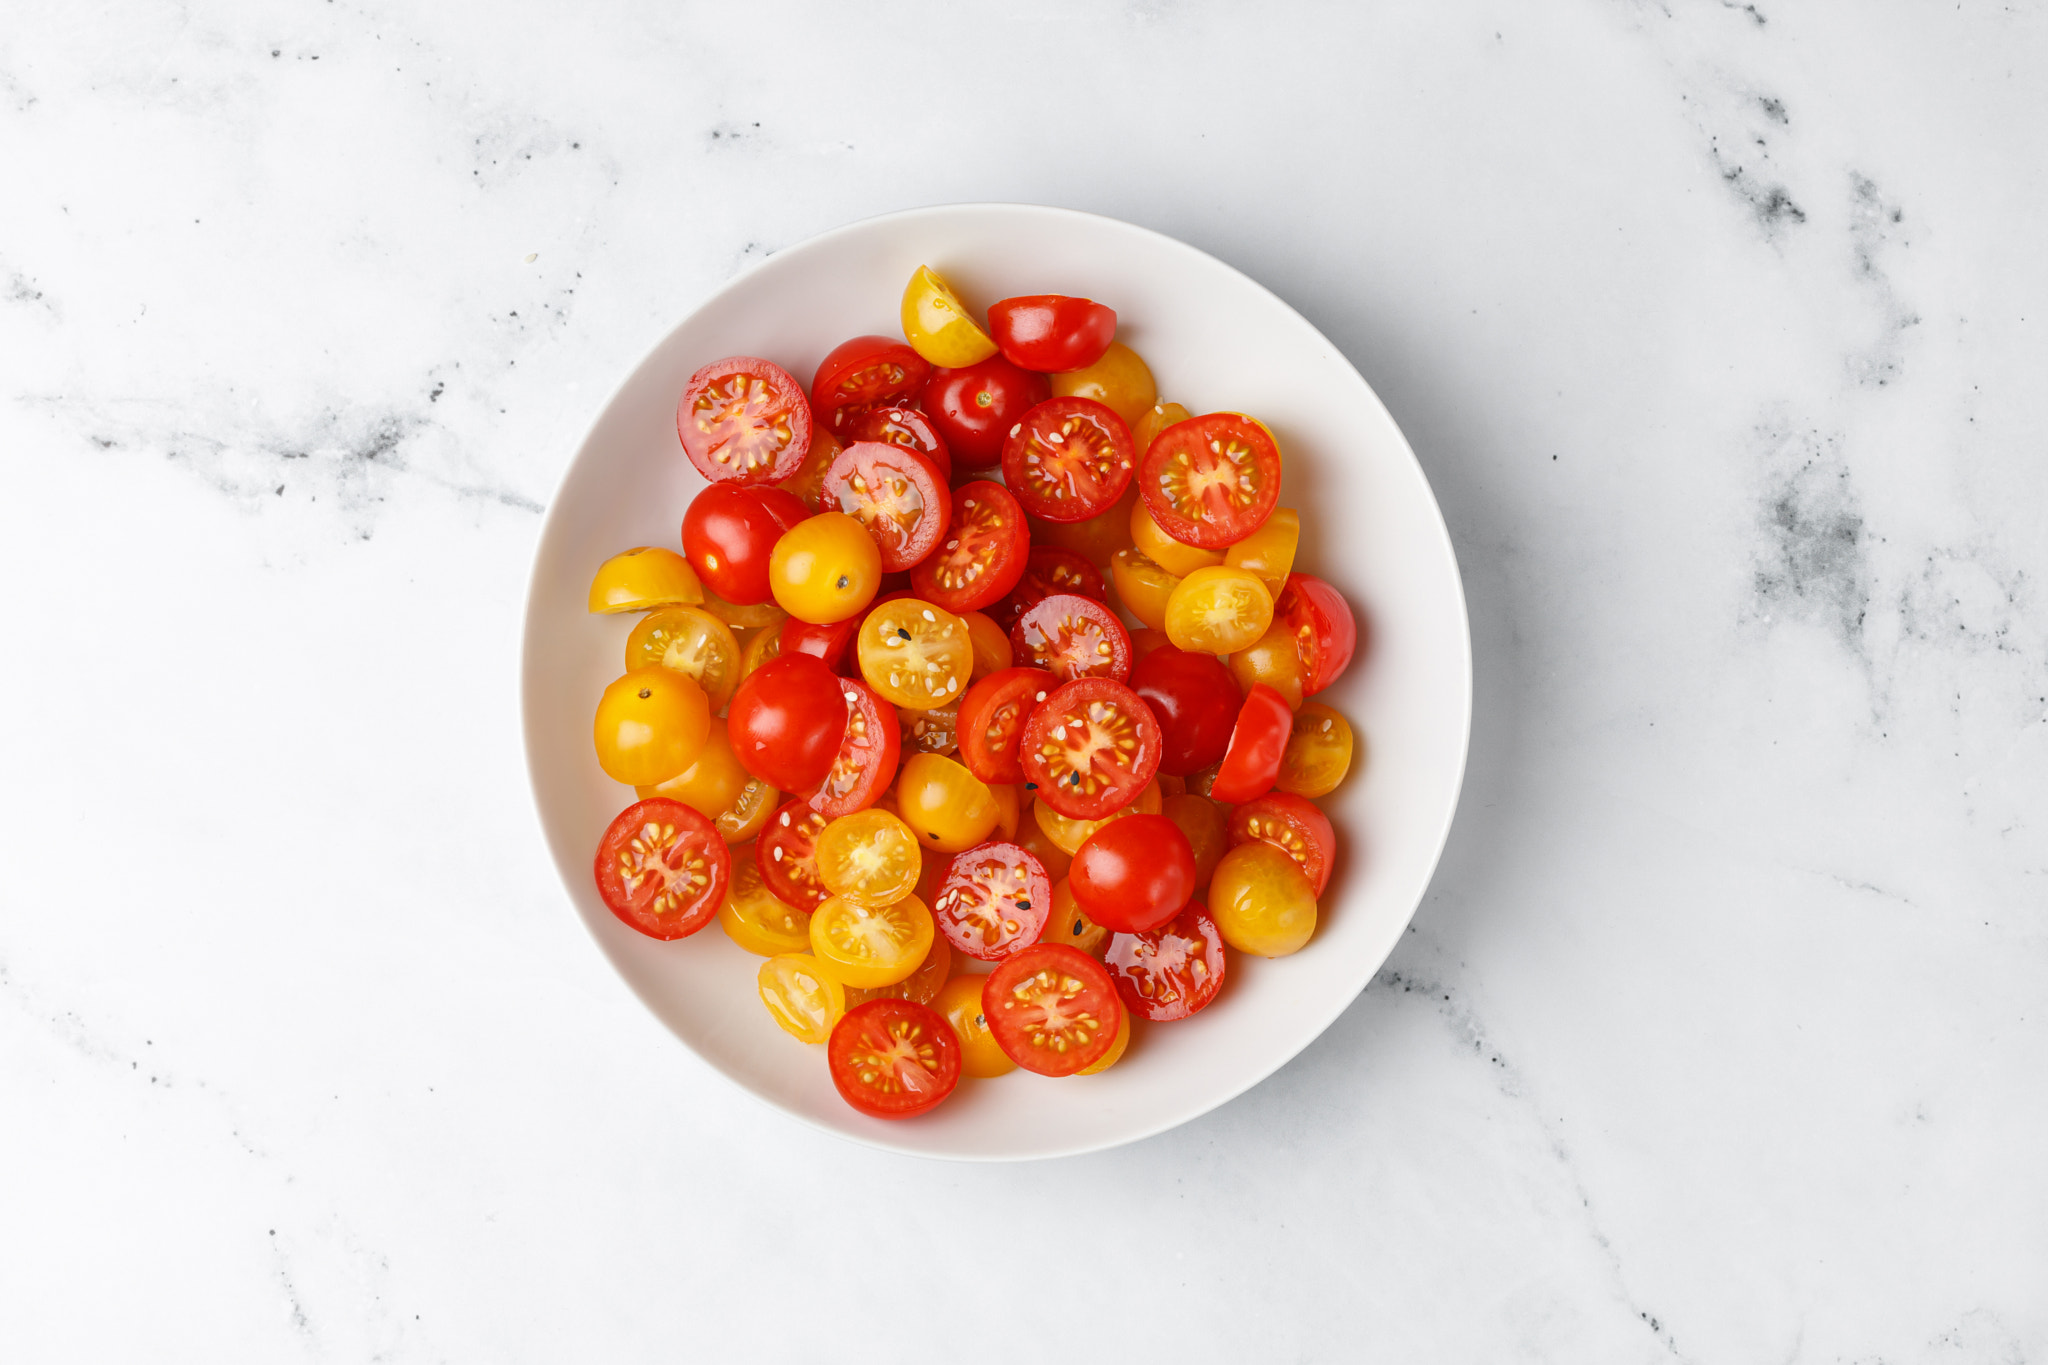 Diet and healthy vegetable salad with cherry red and yellow tomatoes on white plate and marble backg